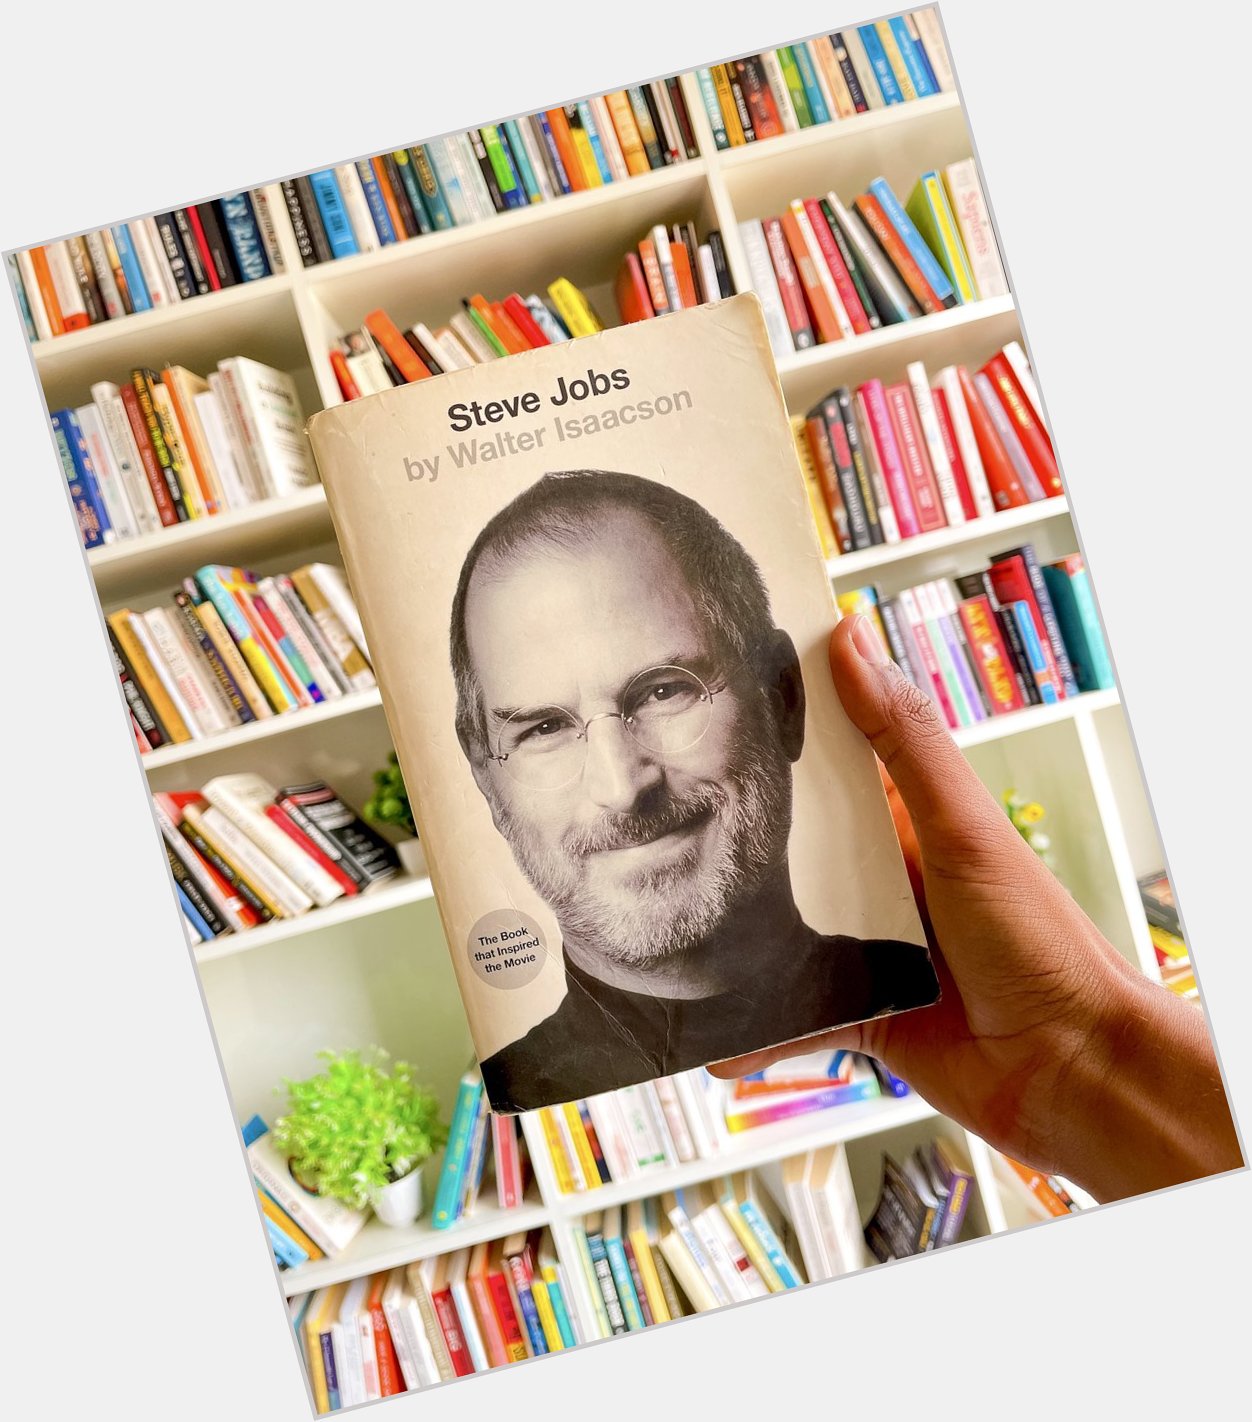 Happy Birthday Steve Jobs!!

Highly recommend everyone to read his biography.  